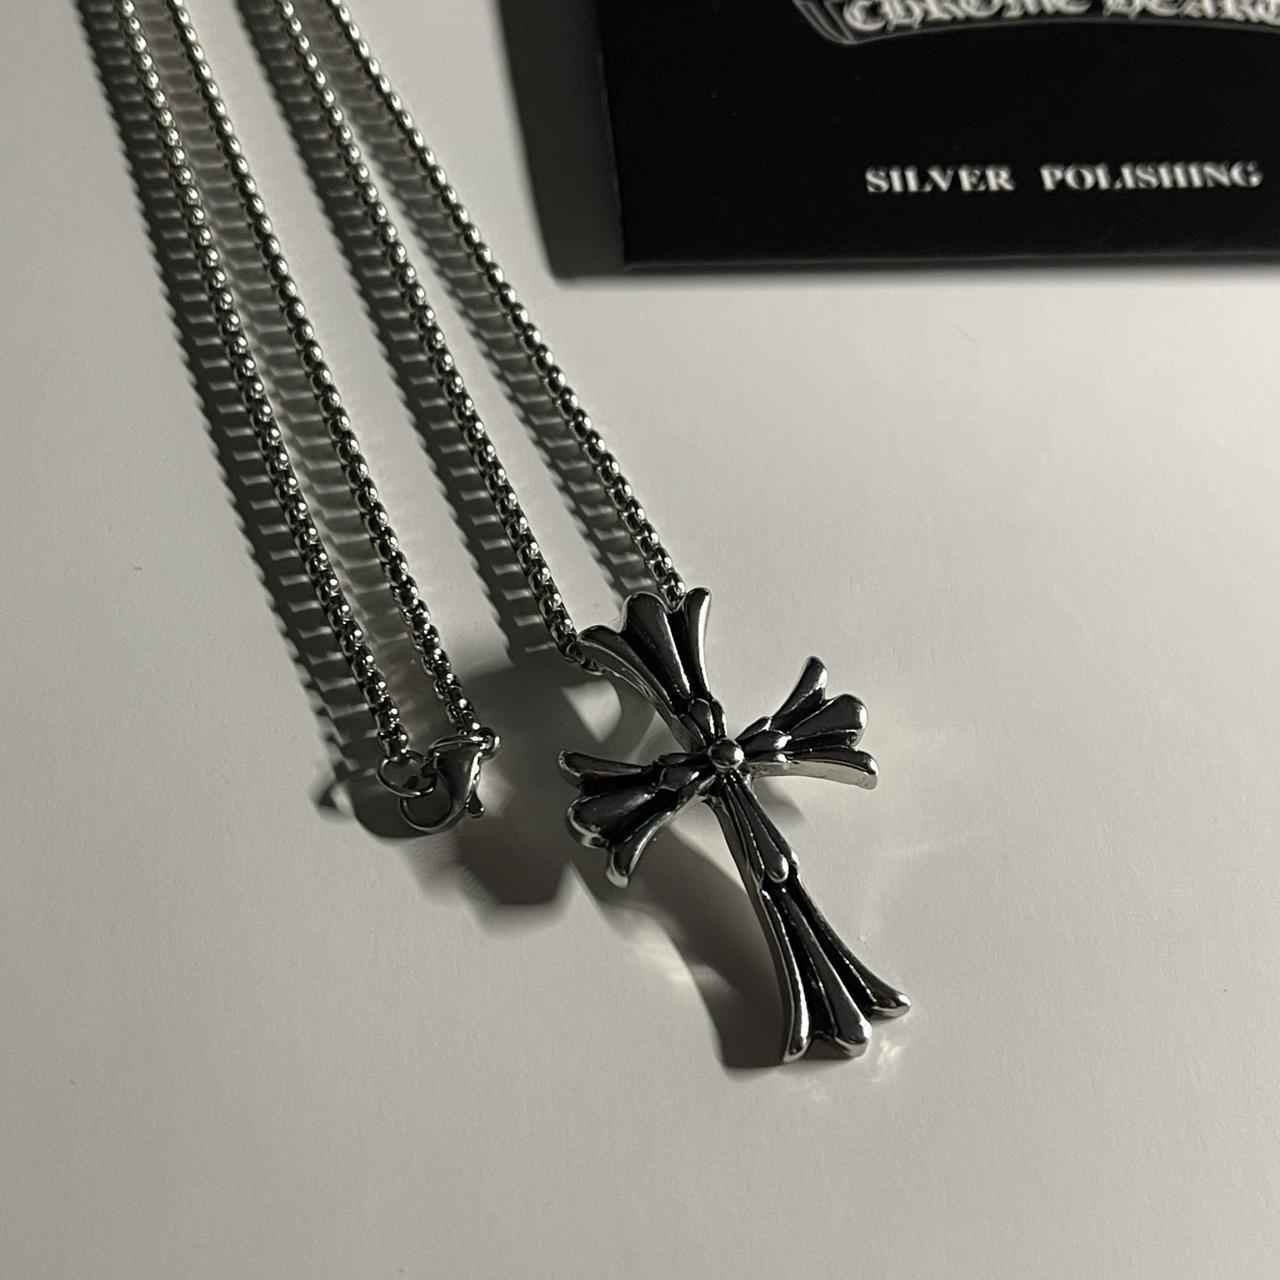 Double Cross Necklace High quality stainless... - Depop